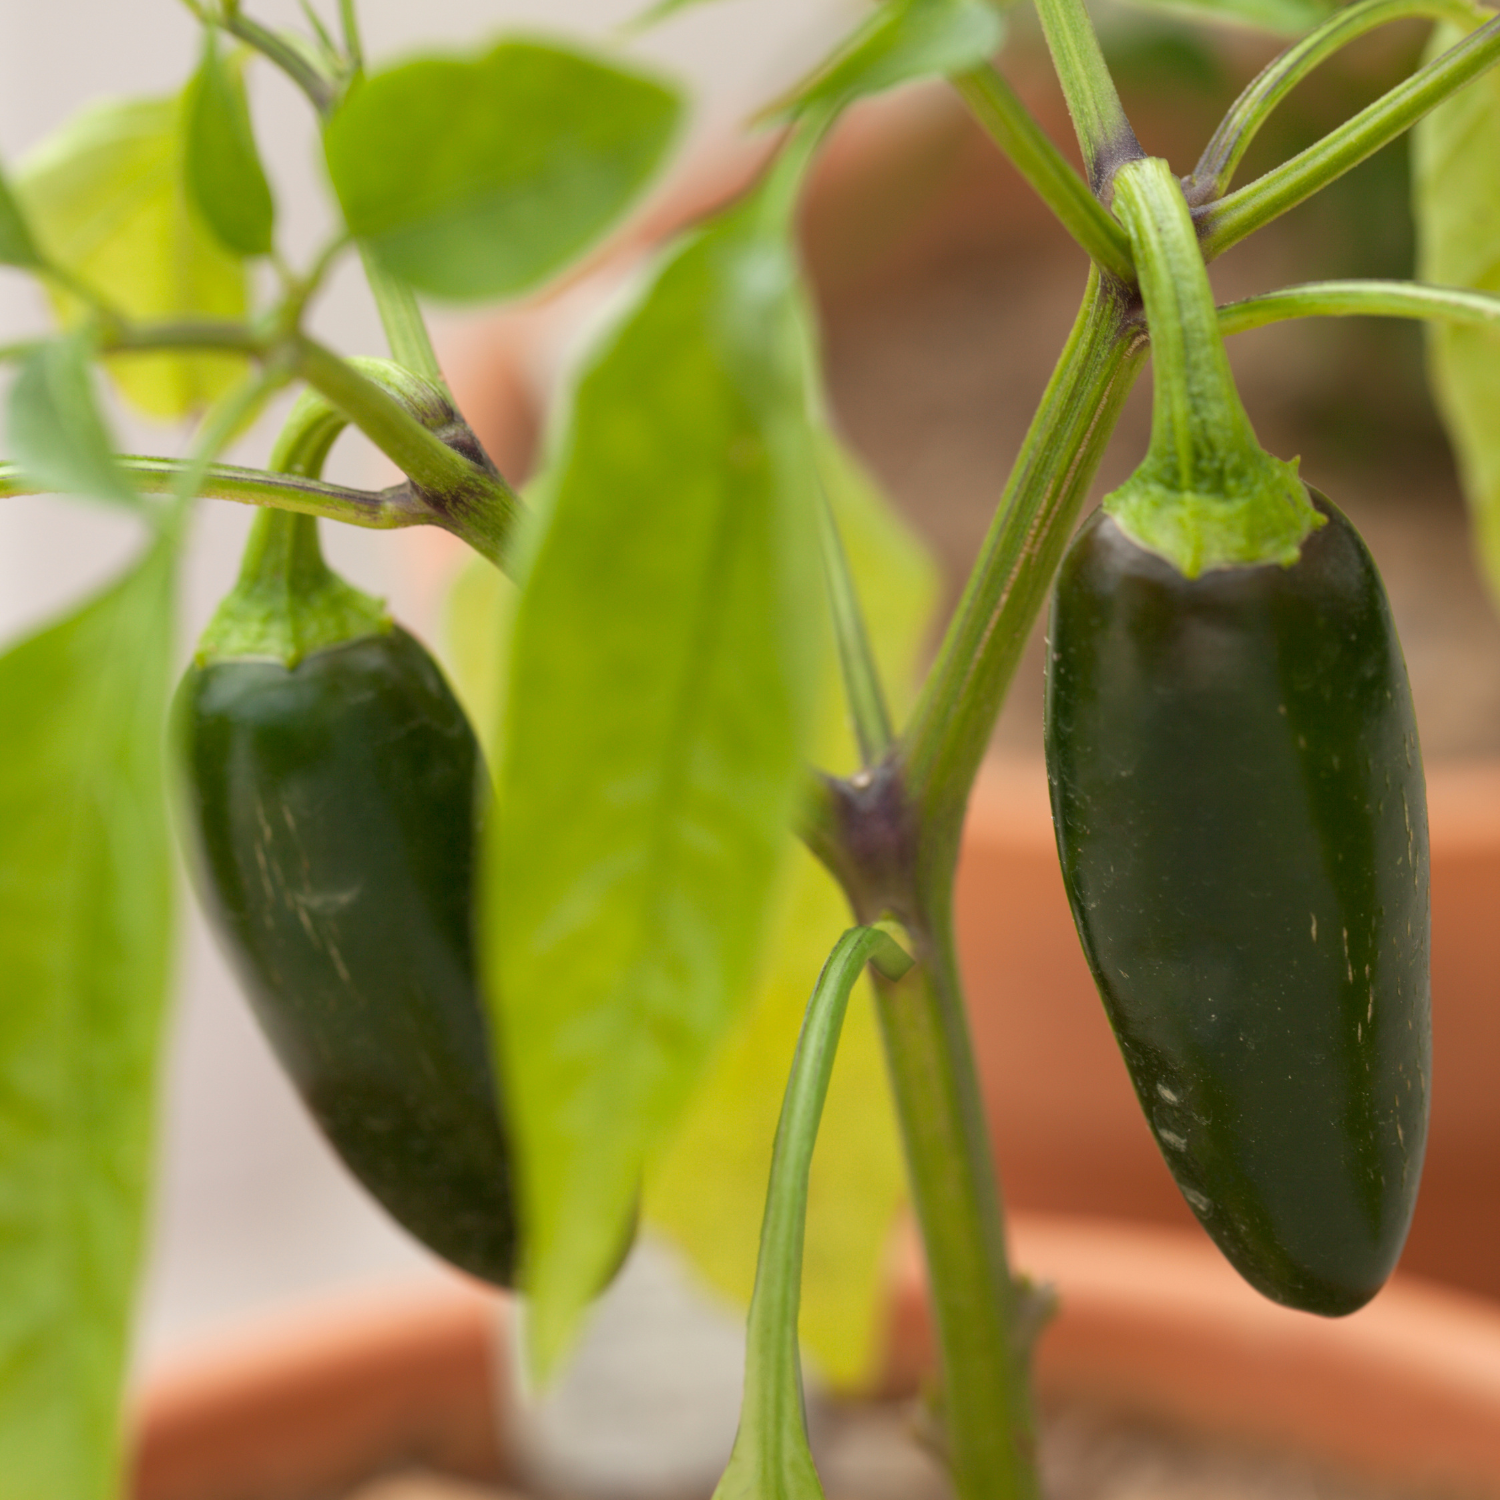 Unleash Your Green Thumb: How to Grow Jalapeno Peppers